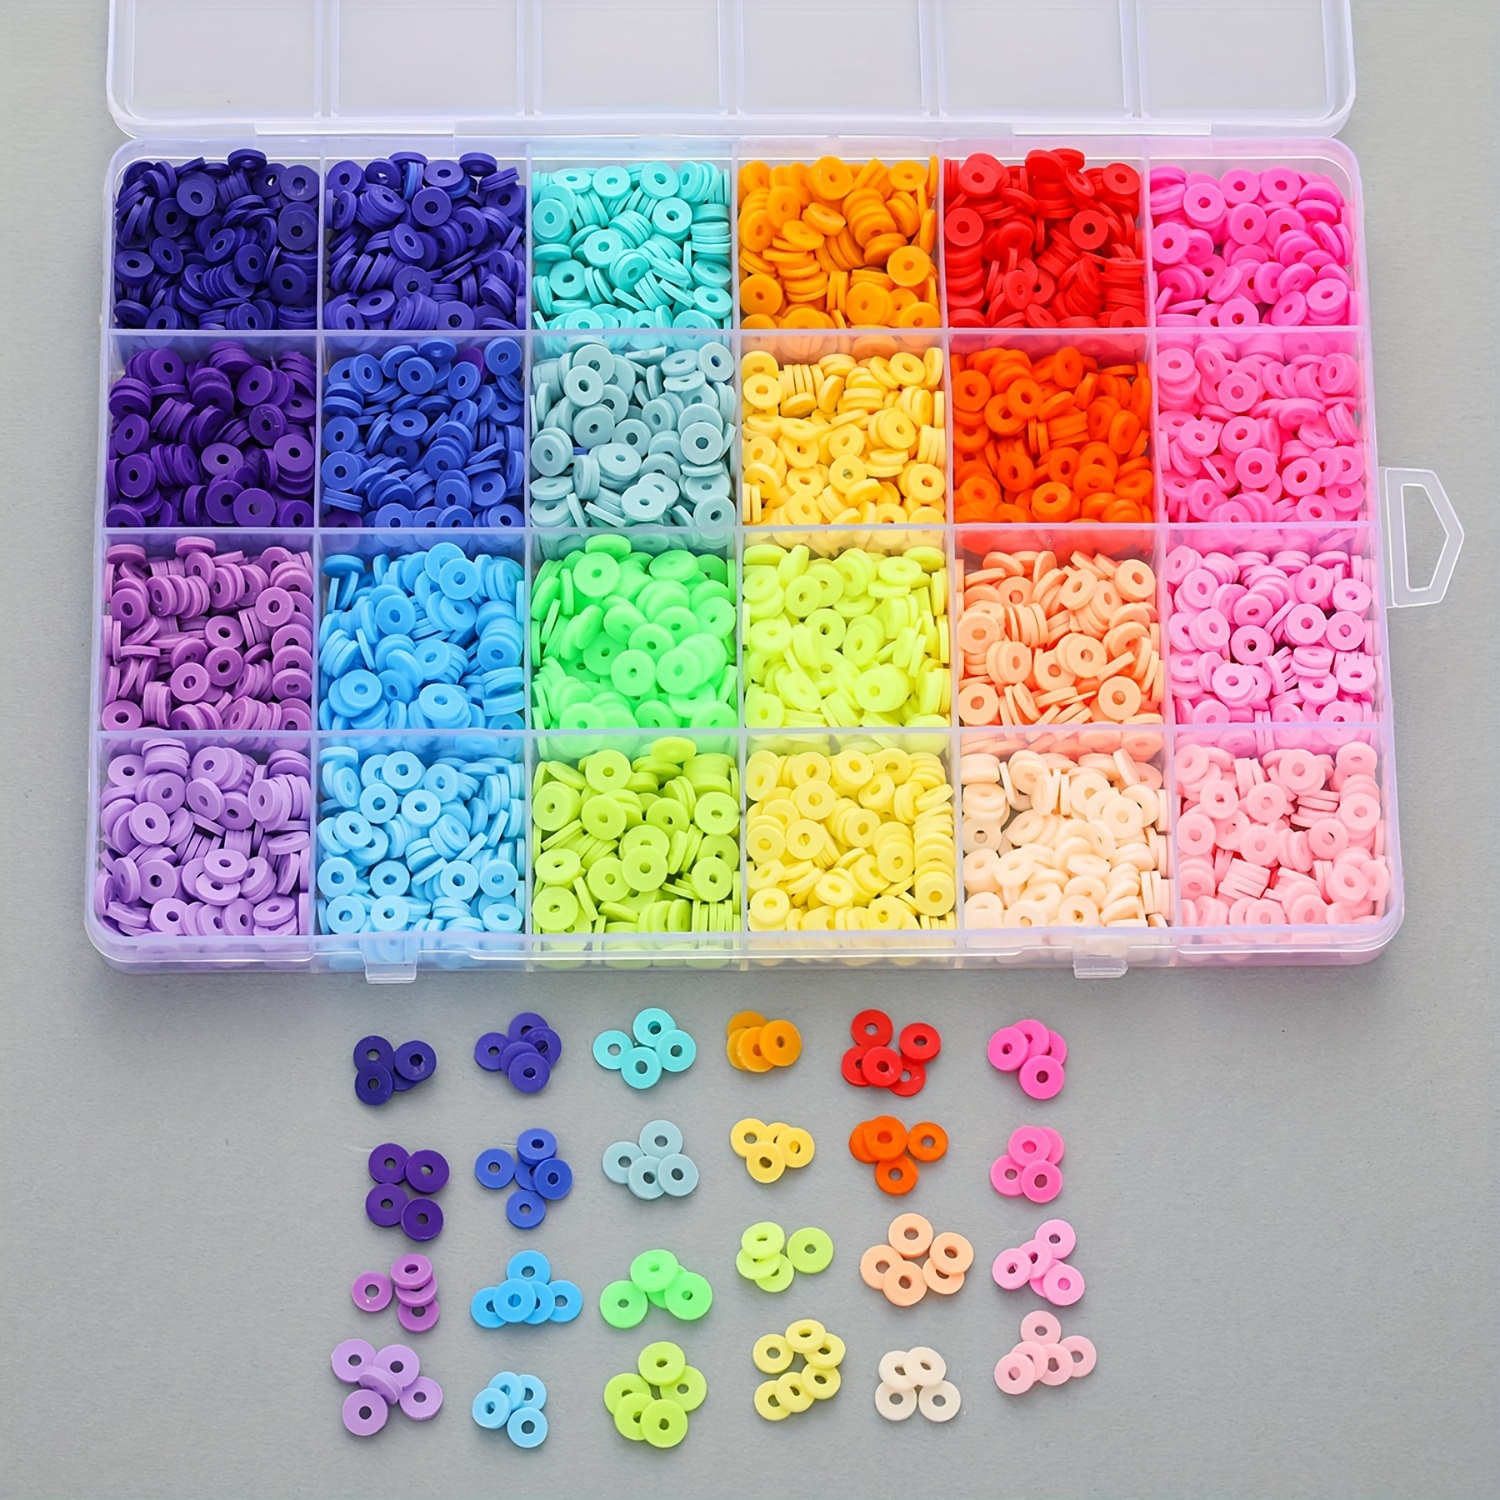 

A Box Of 4800pcs 24-color Polymer Clay Beads, Gasket Beads, Heishi Beads Suitable For Making Necklaces, Bracelets, Mobile Phone Chains And Diy Jewelry